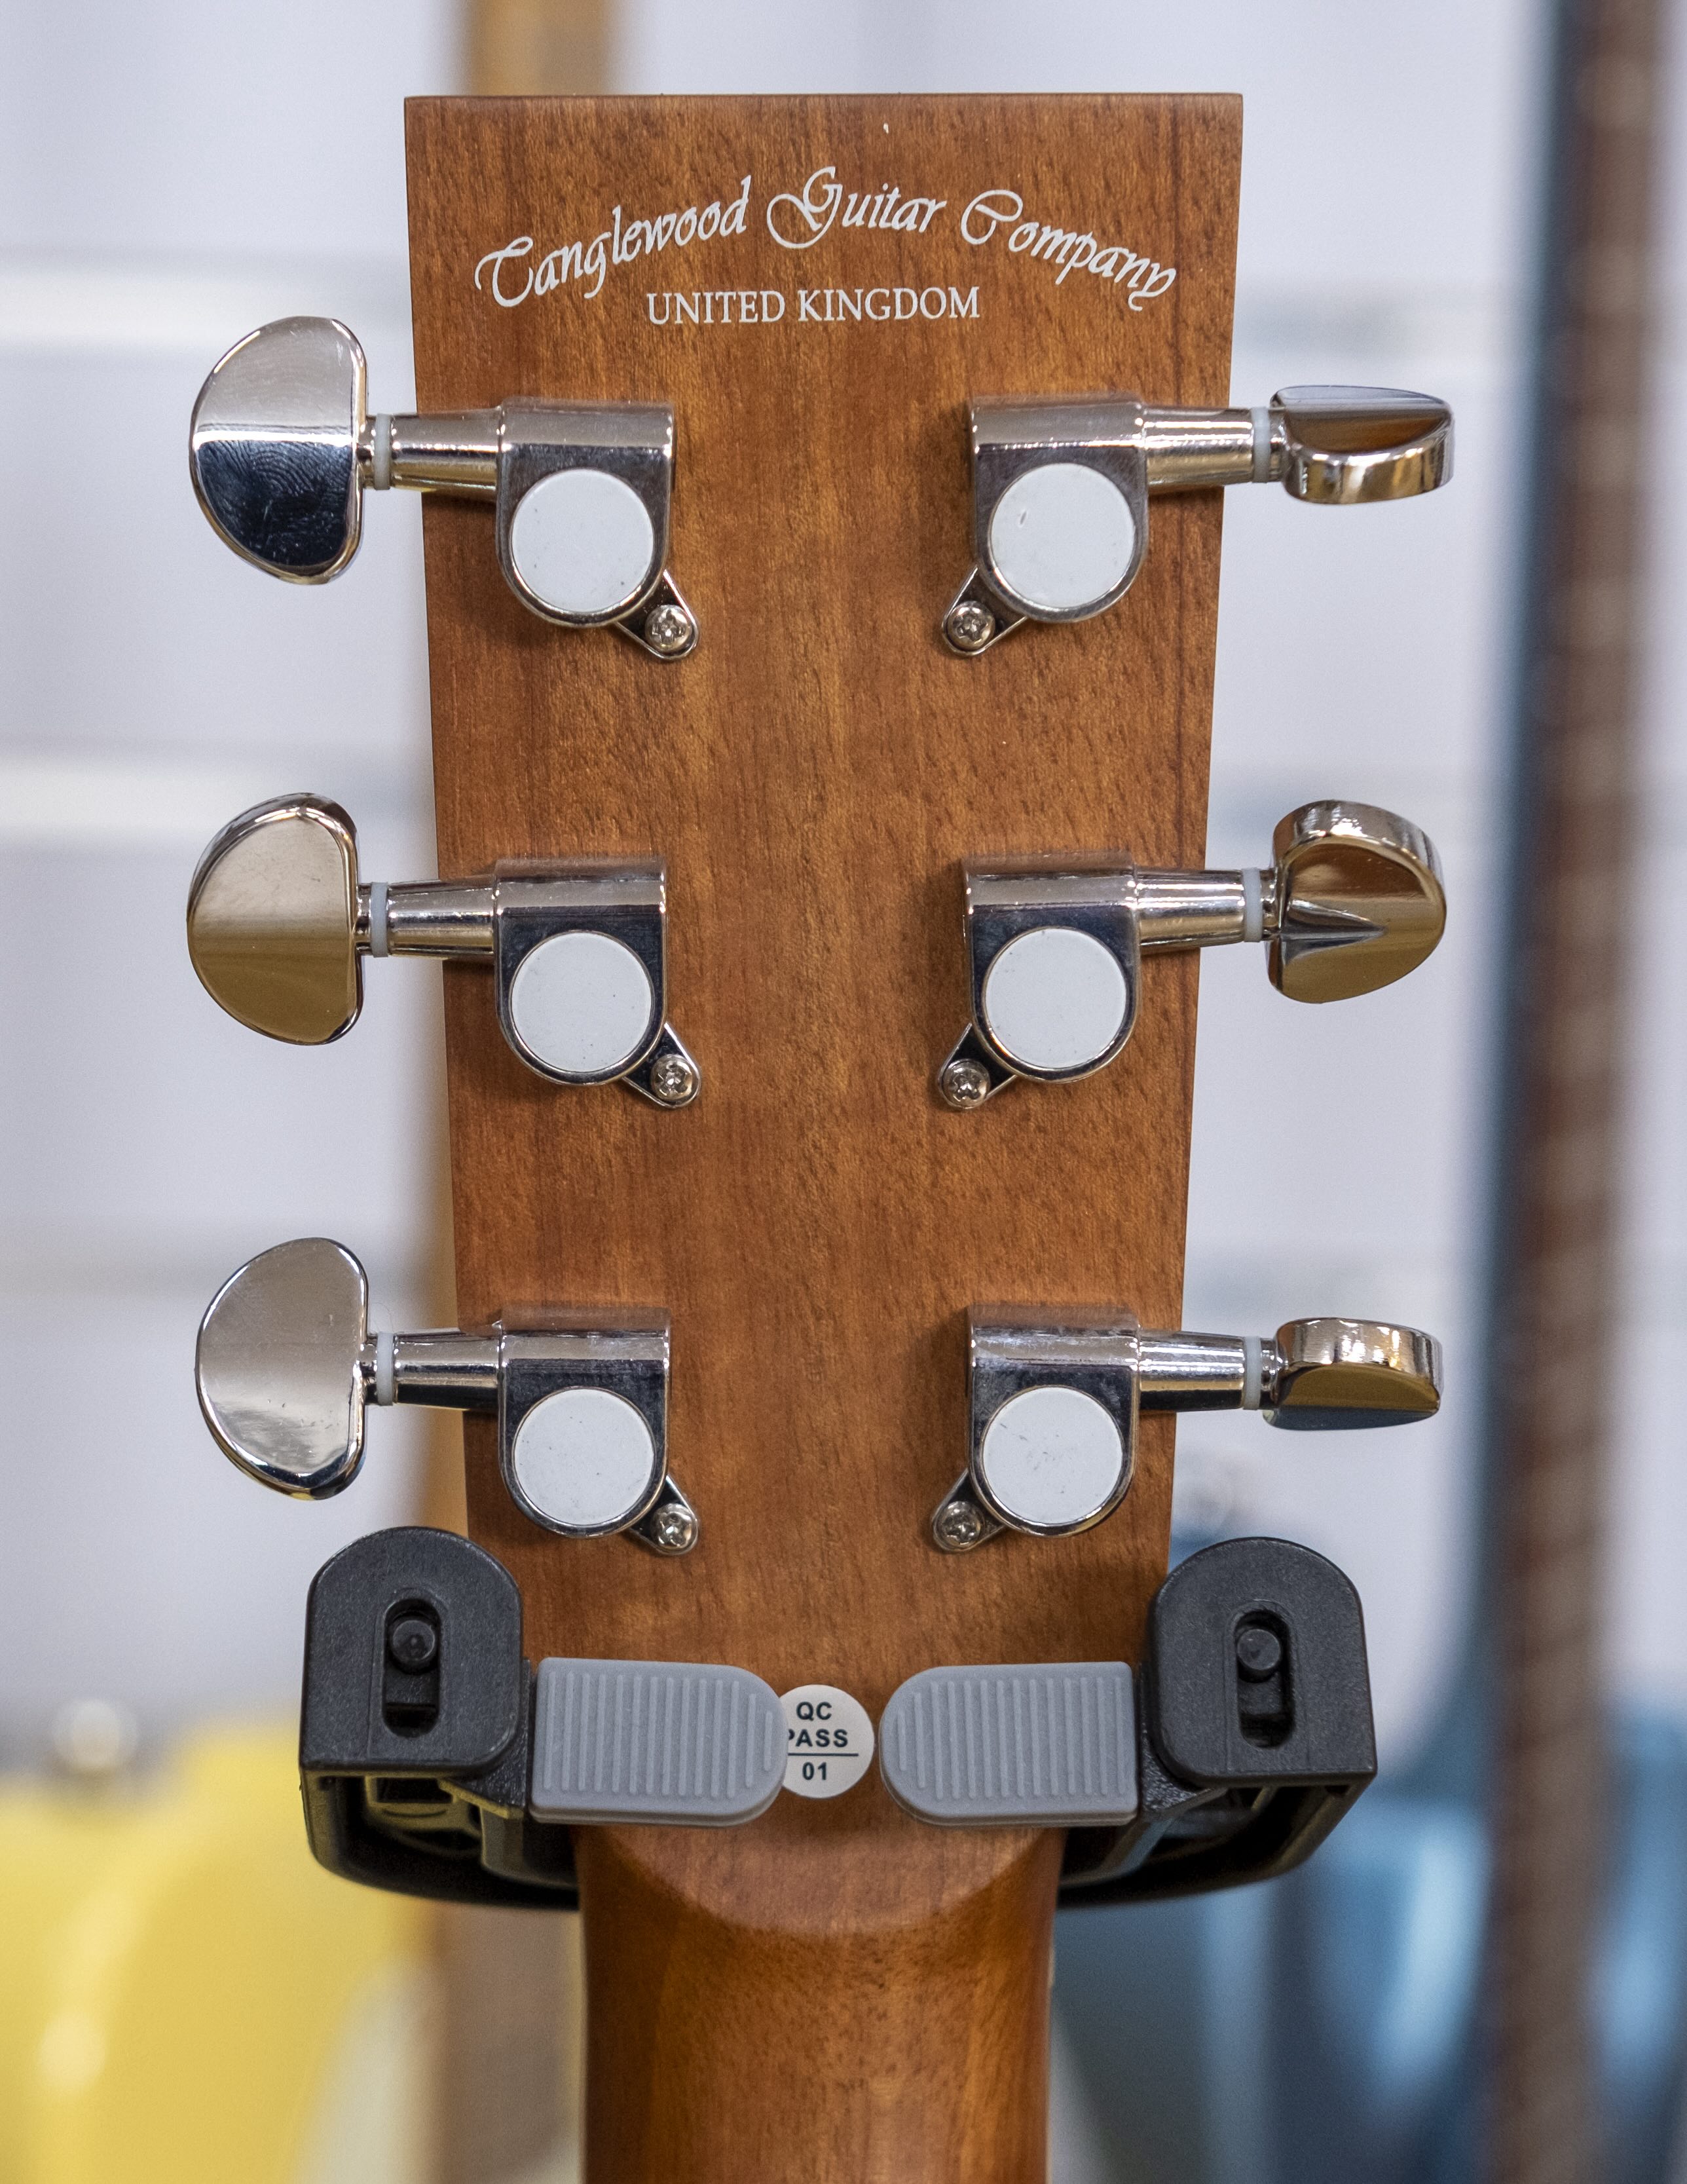 Tanglewood Union Series Dreadnought Acoustic Electric Guitar